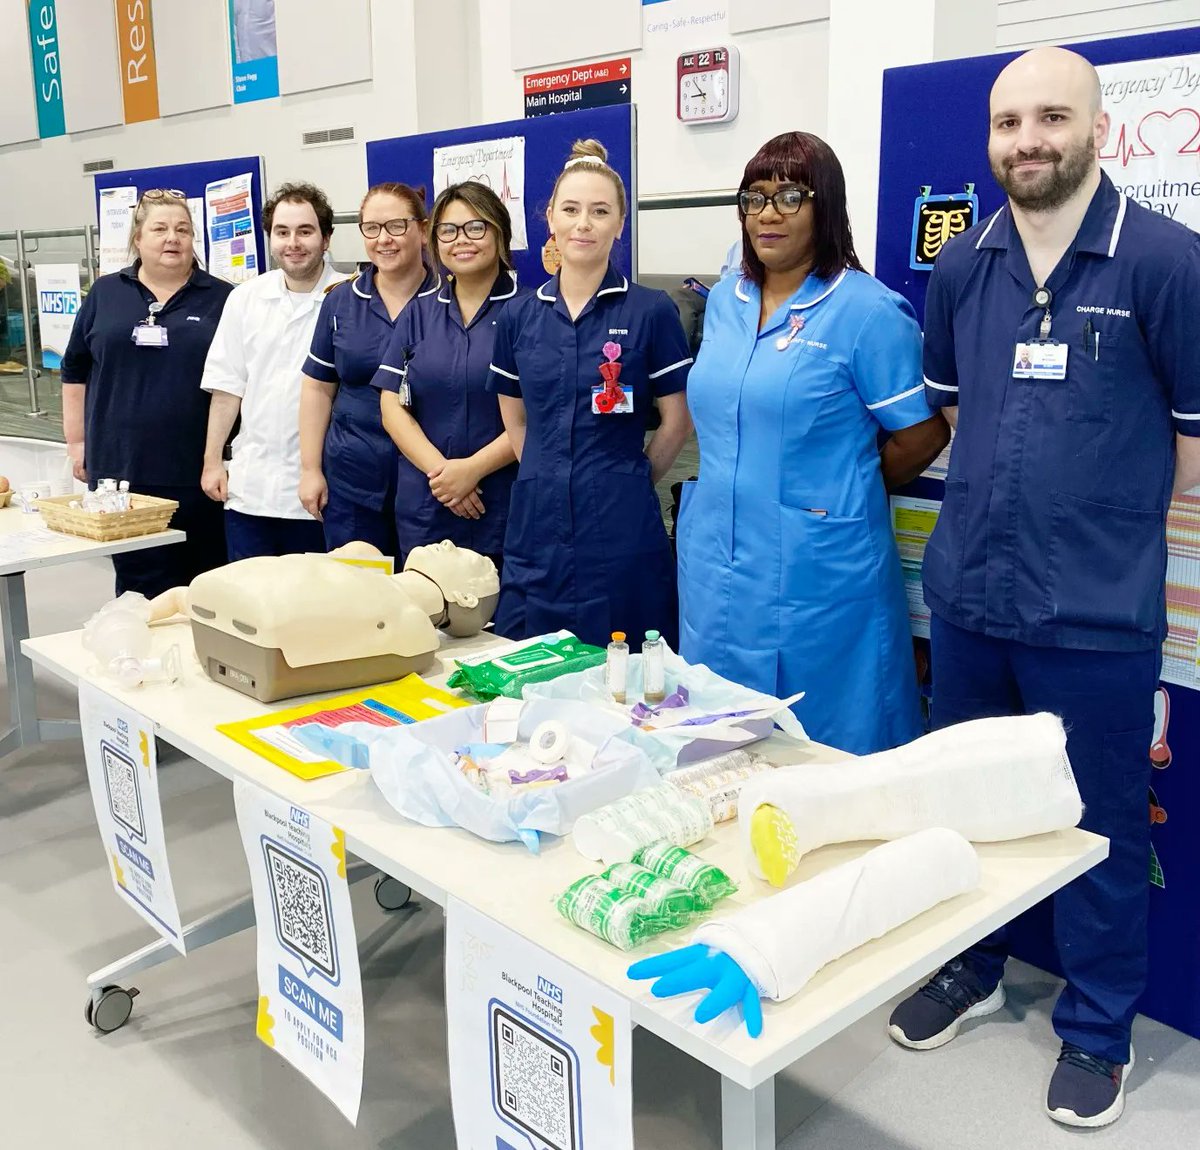 Our ED recruitment event is open until 5pm today - come to the main entrance at Victoria Hospital and meet the team. Band 5 nurses, HCAs and housekeeper roles are on offer. We are interviewing and making job offers on the day and no appointment is needed.